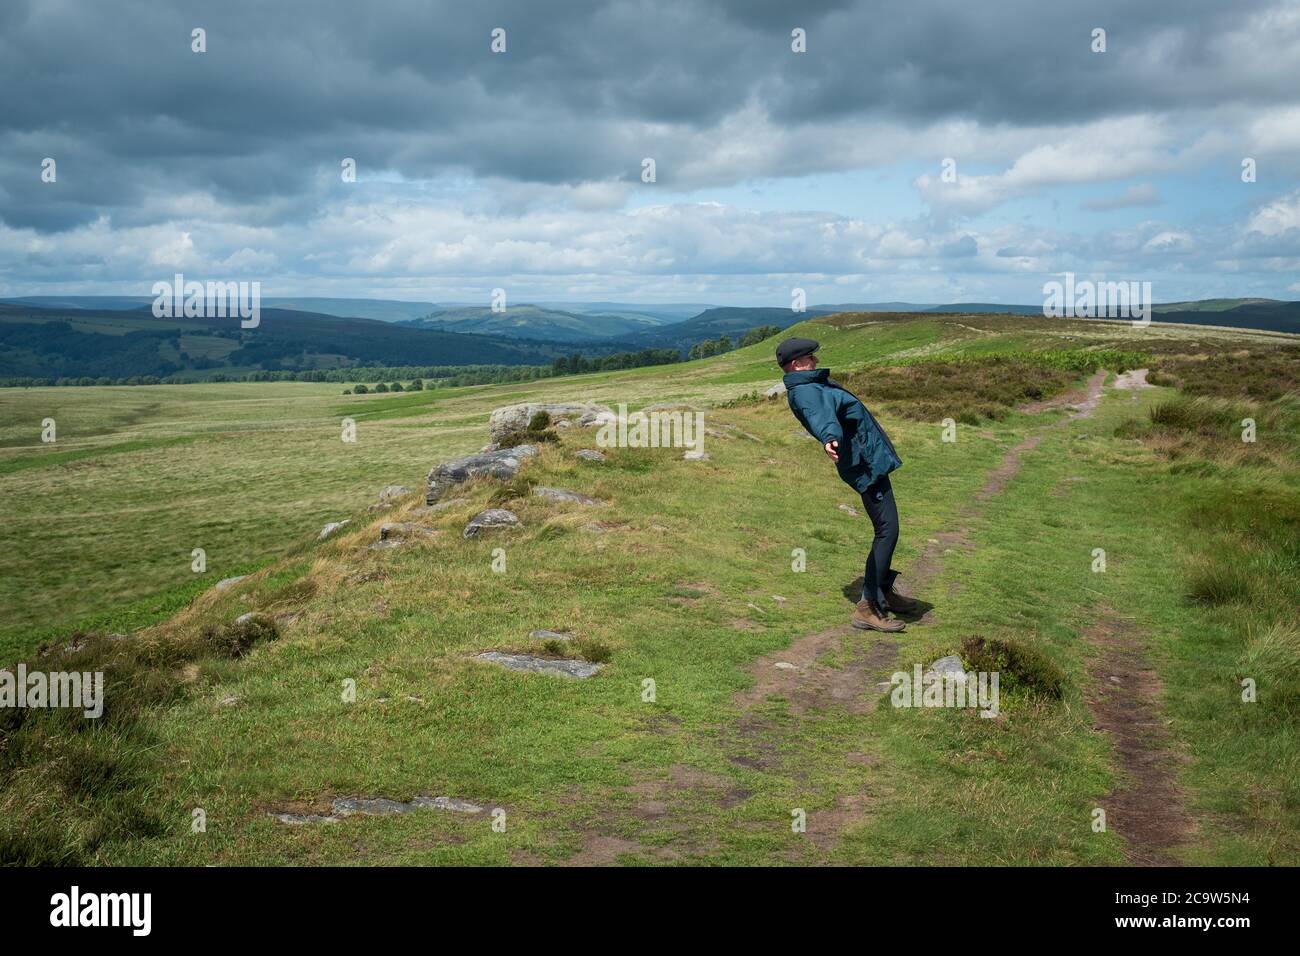 Man leaning against the wind, White Edge, Peak District, UK Stock Photo